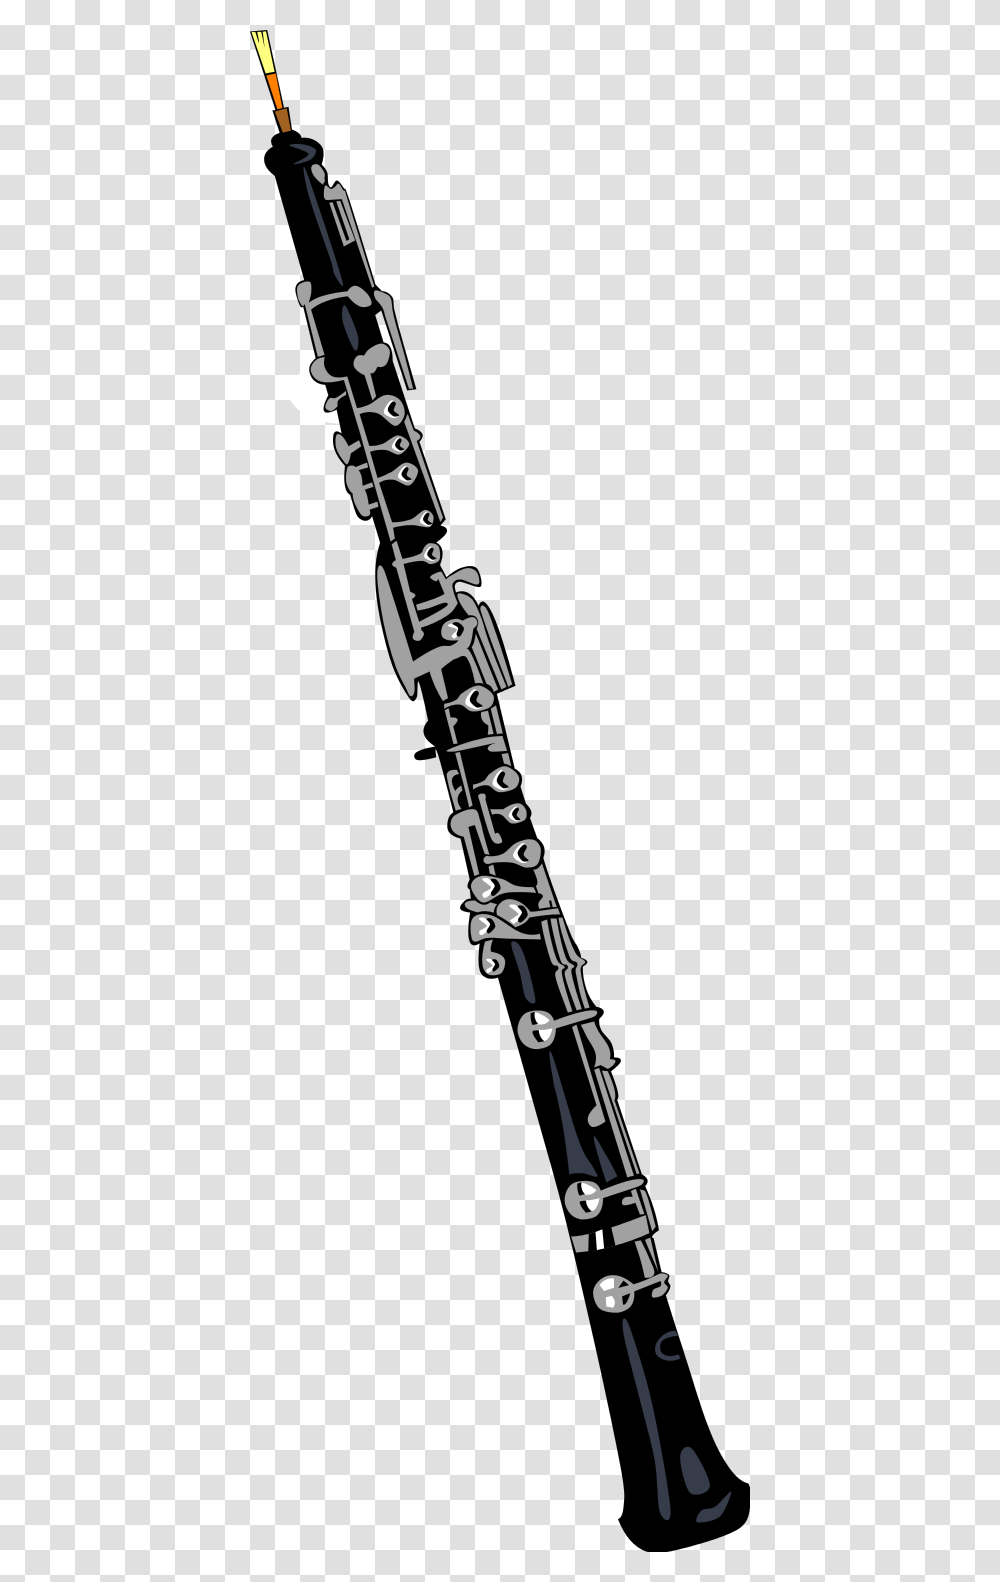 File Oboe 1 Svg Wikimedia Commons Oboe Clipart, Musical Instrument, Sword, Blade, Weapon Transparent Png